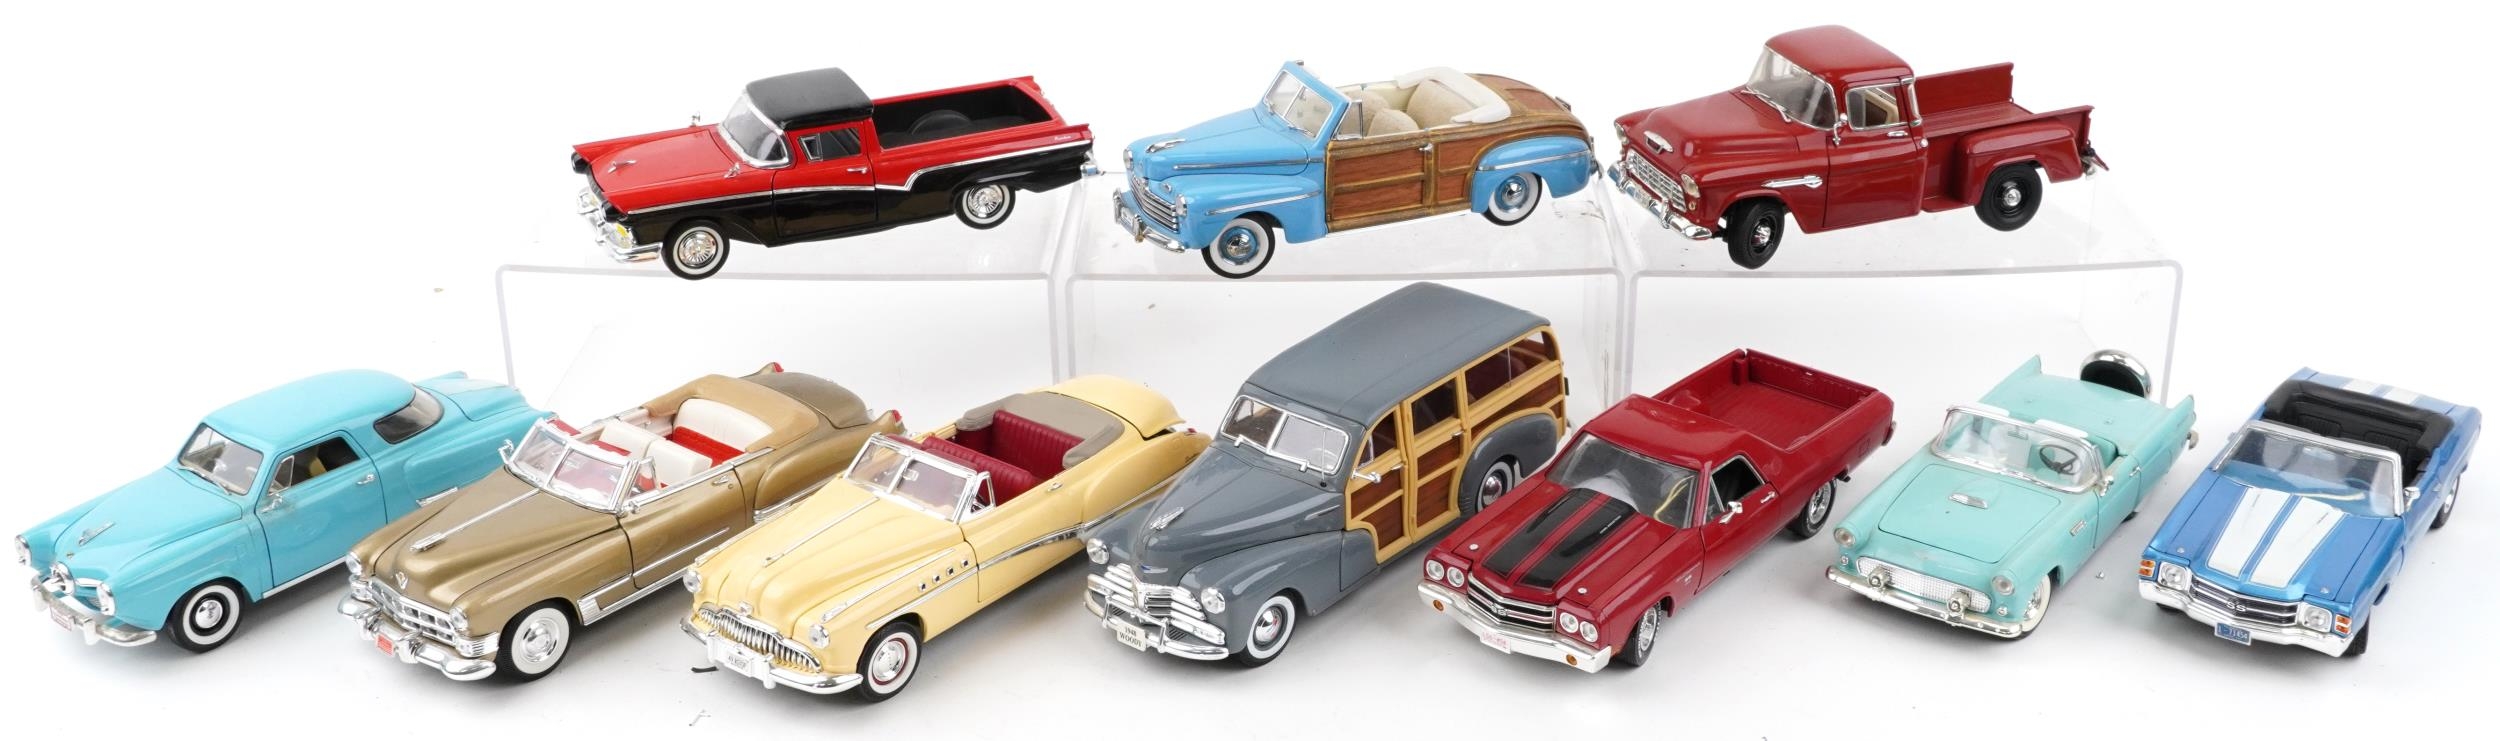 Ten 1:18 scale diecast vehicles including Road Legends 1957 Ford Ranchero, Signature Series 1946